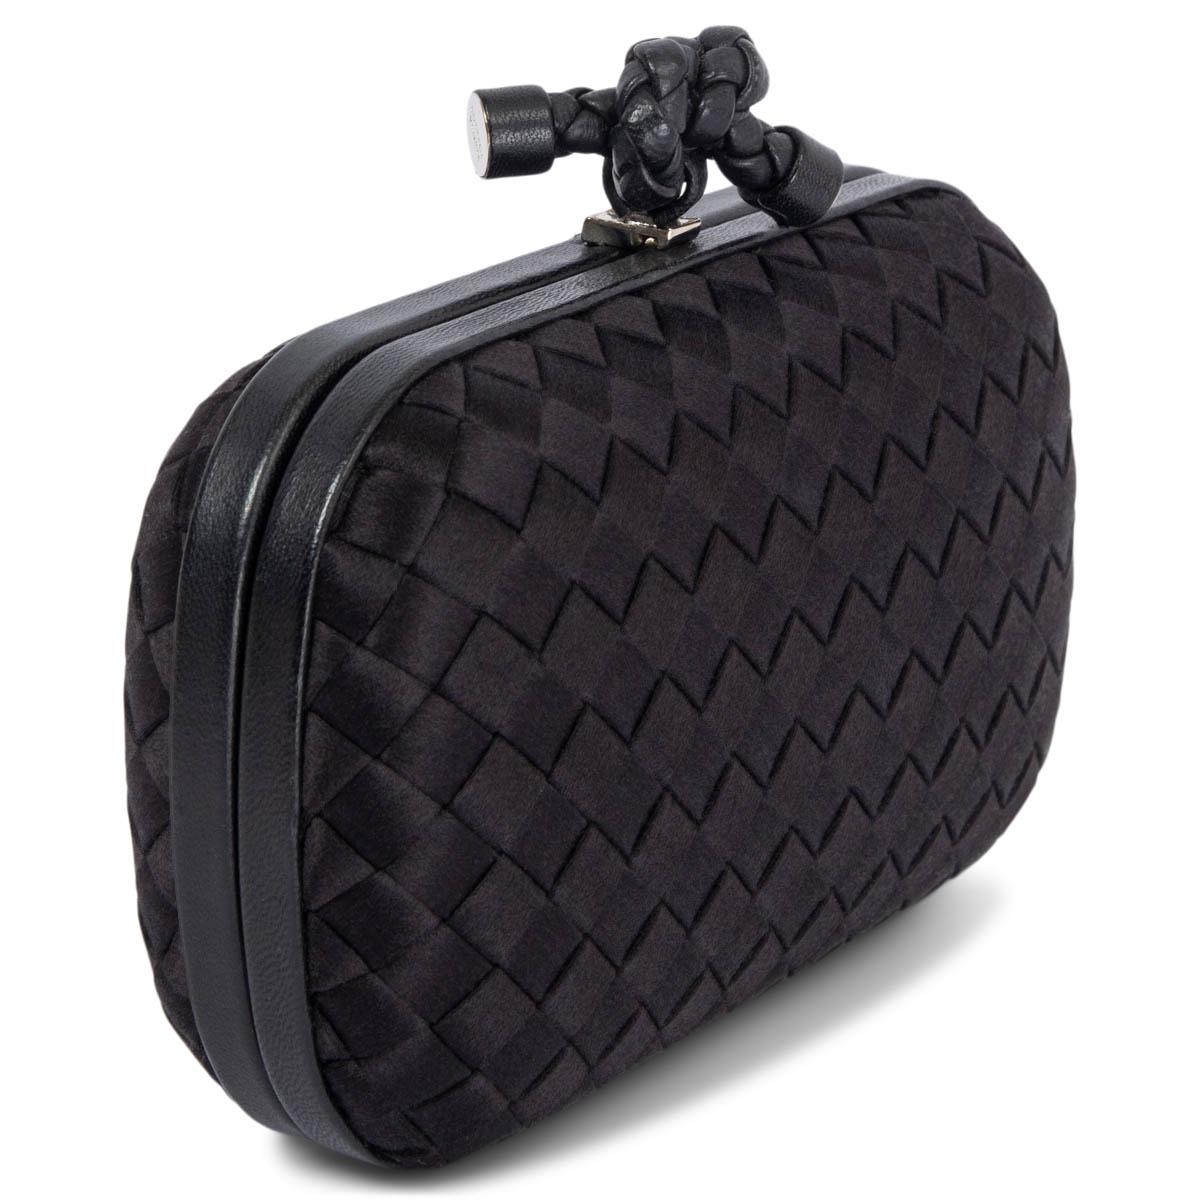 100% authentic Bottega Veneta Knot clutch in black woven silk satin fabric with frame in black calfskin and Intrecciato knot closure. Lined in black silk satin. Has been carried and is in excellent condition. 

Measurements
Height	10cm